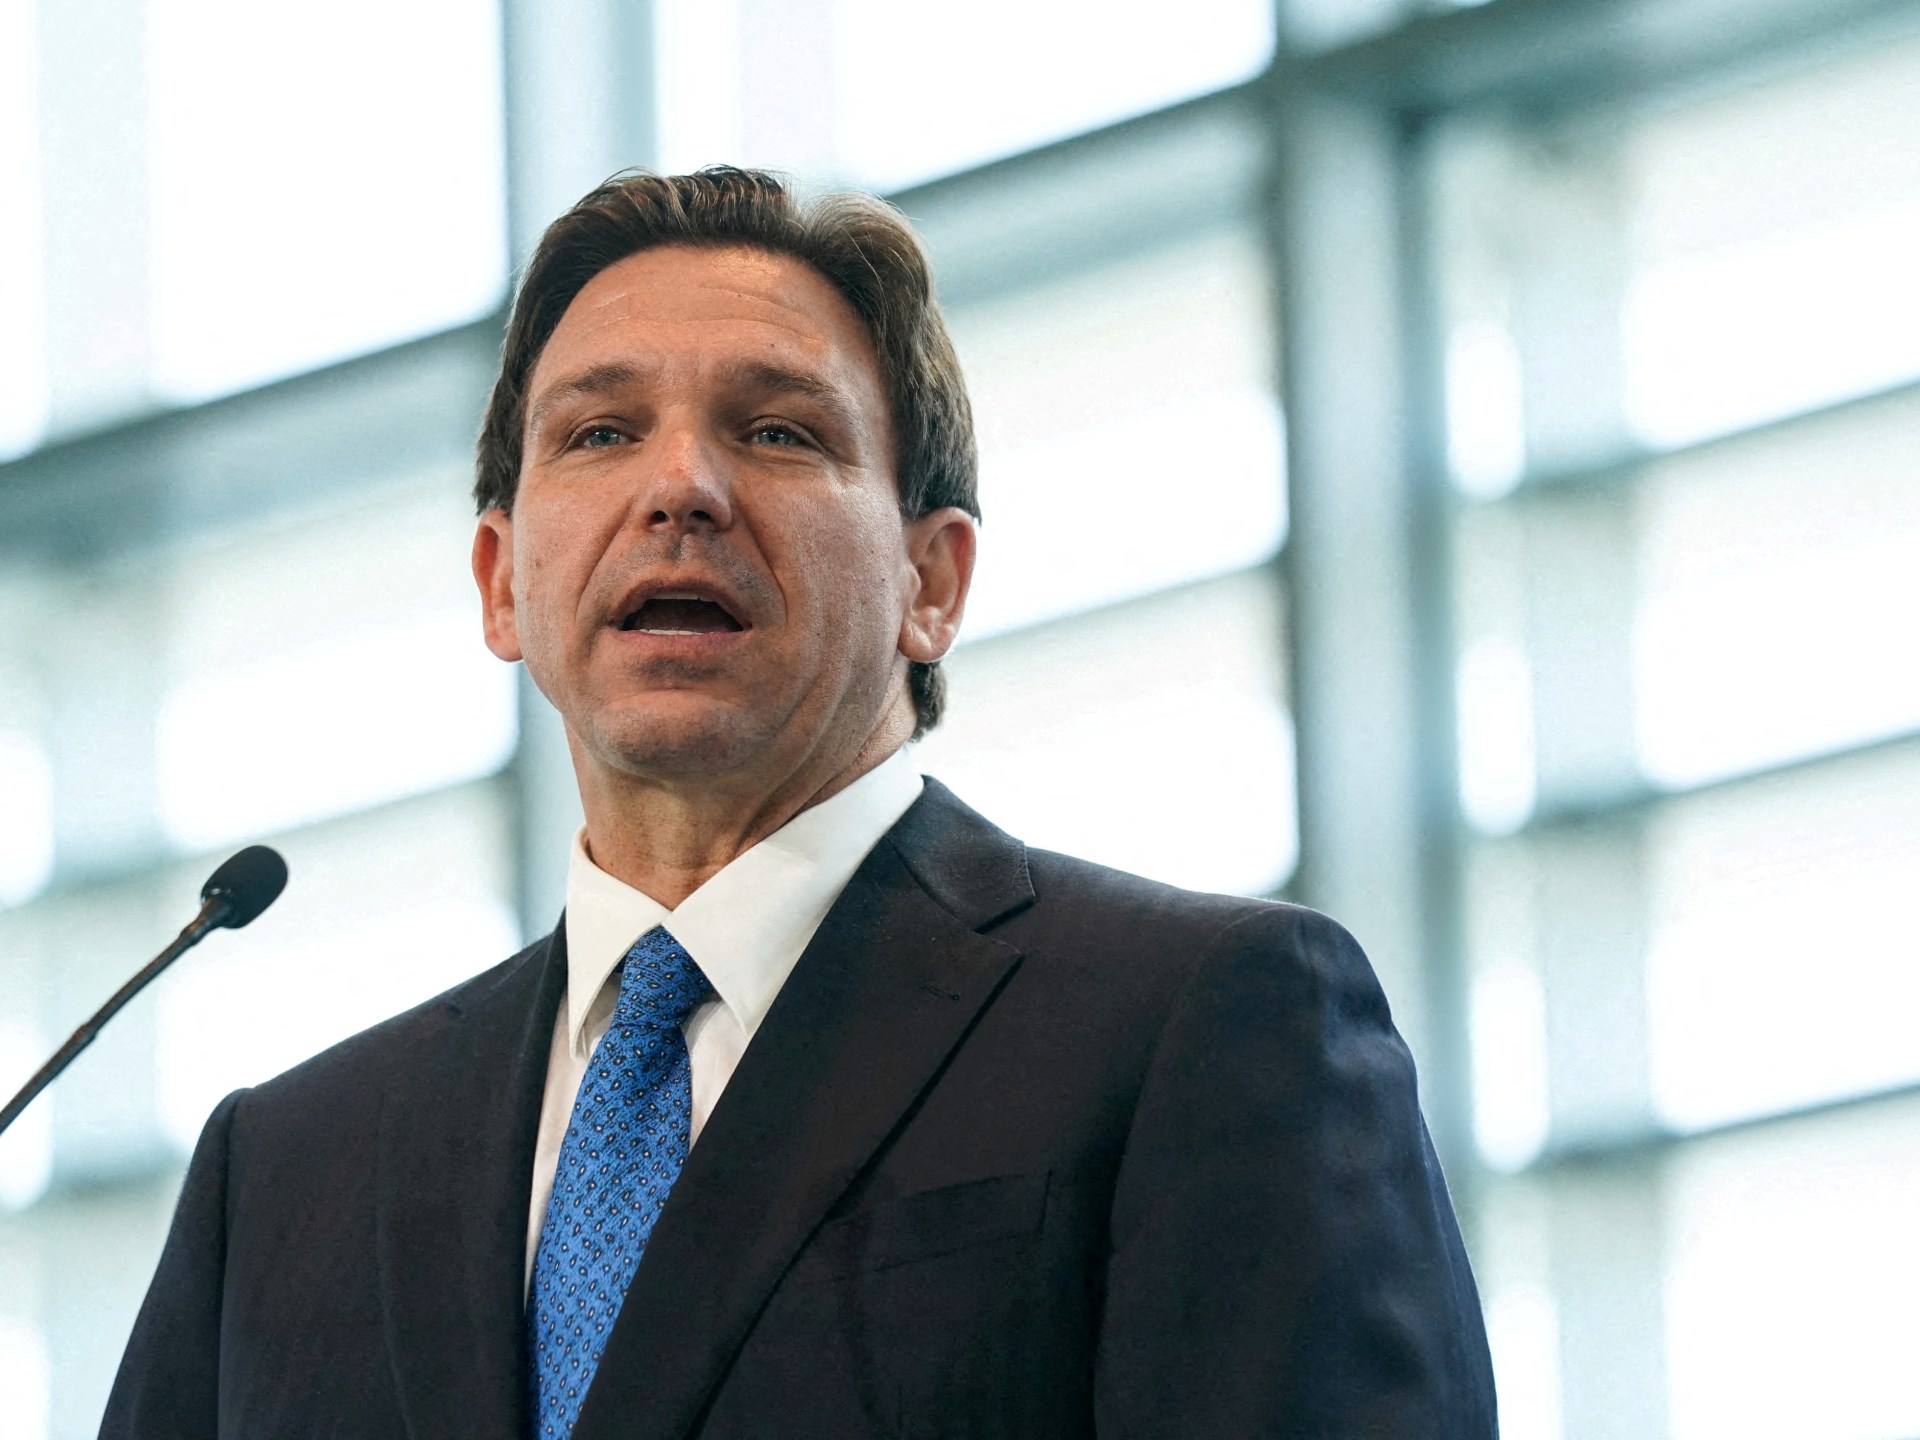 DeSantis launches US presidential bid on glitch-filled show |  Election News